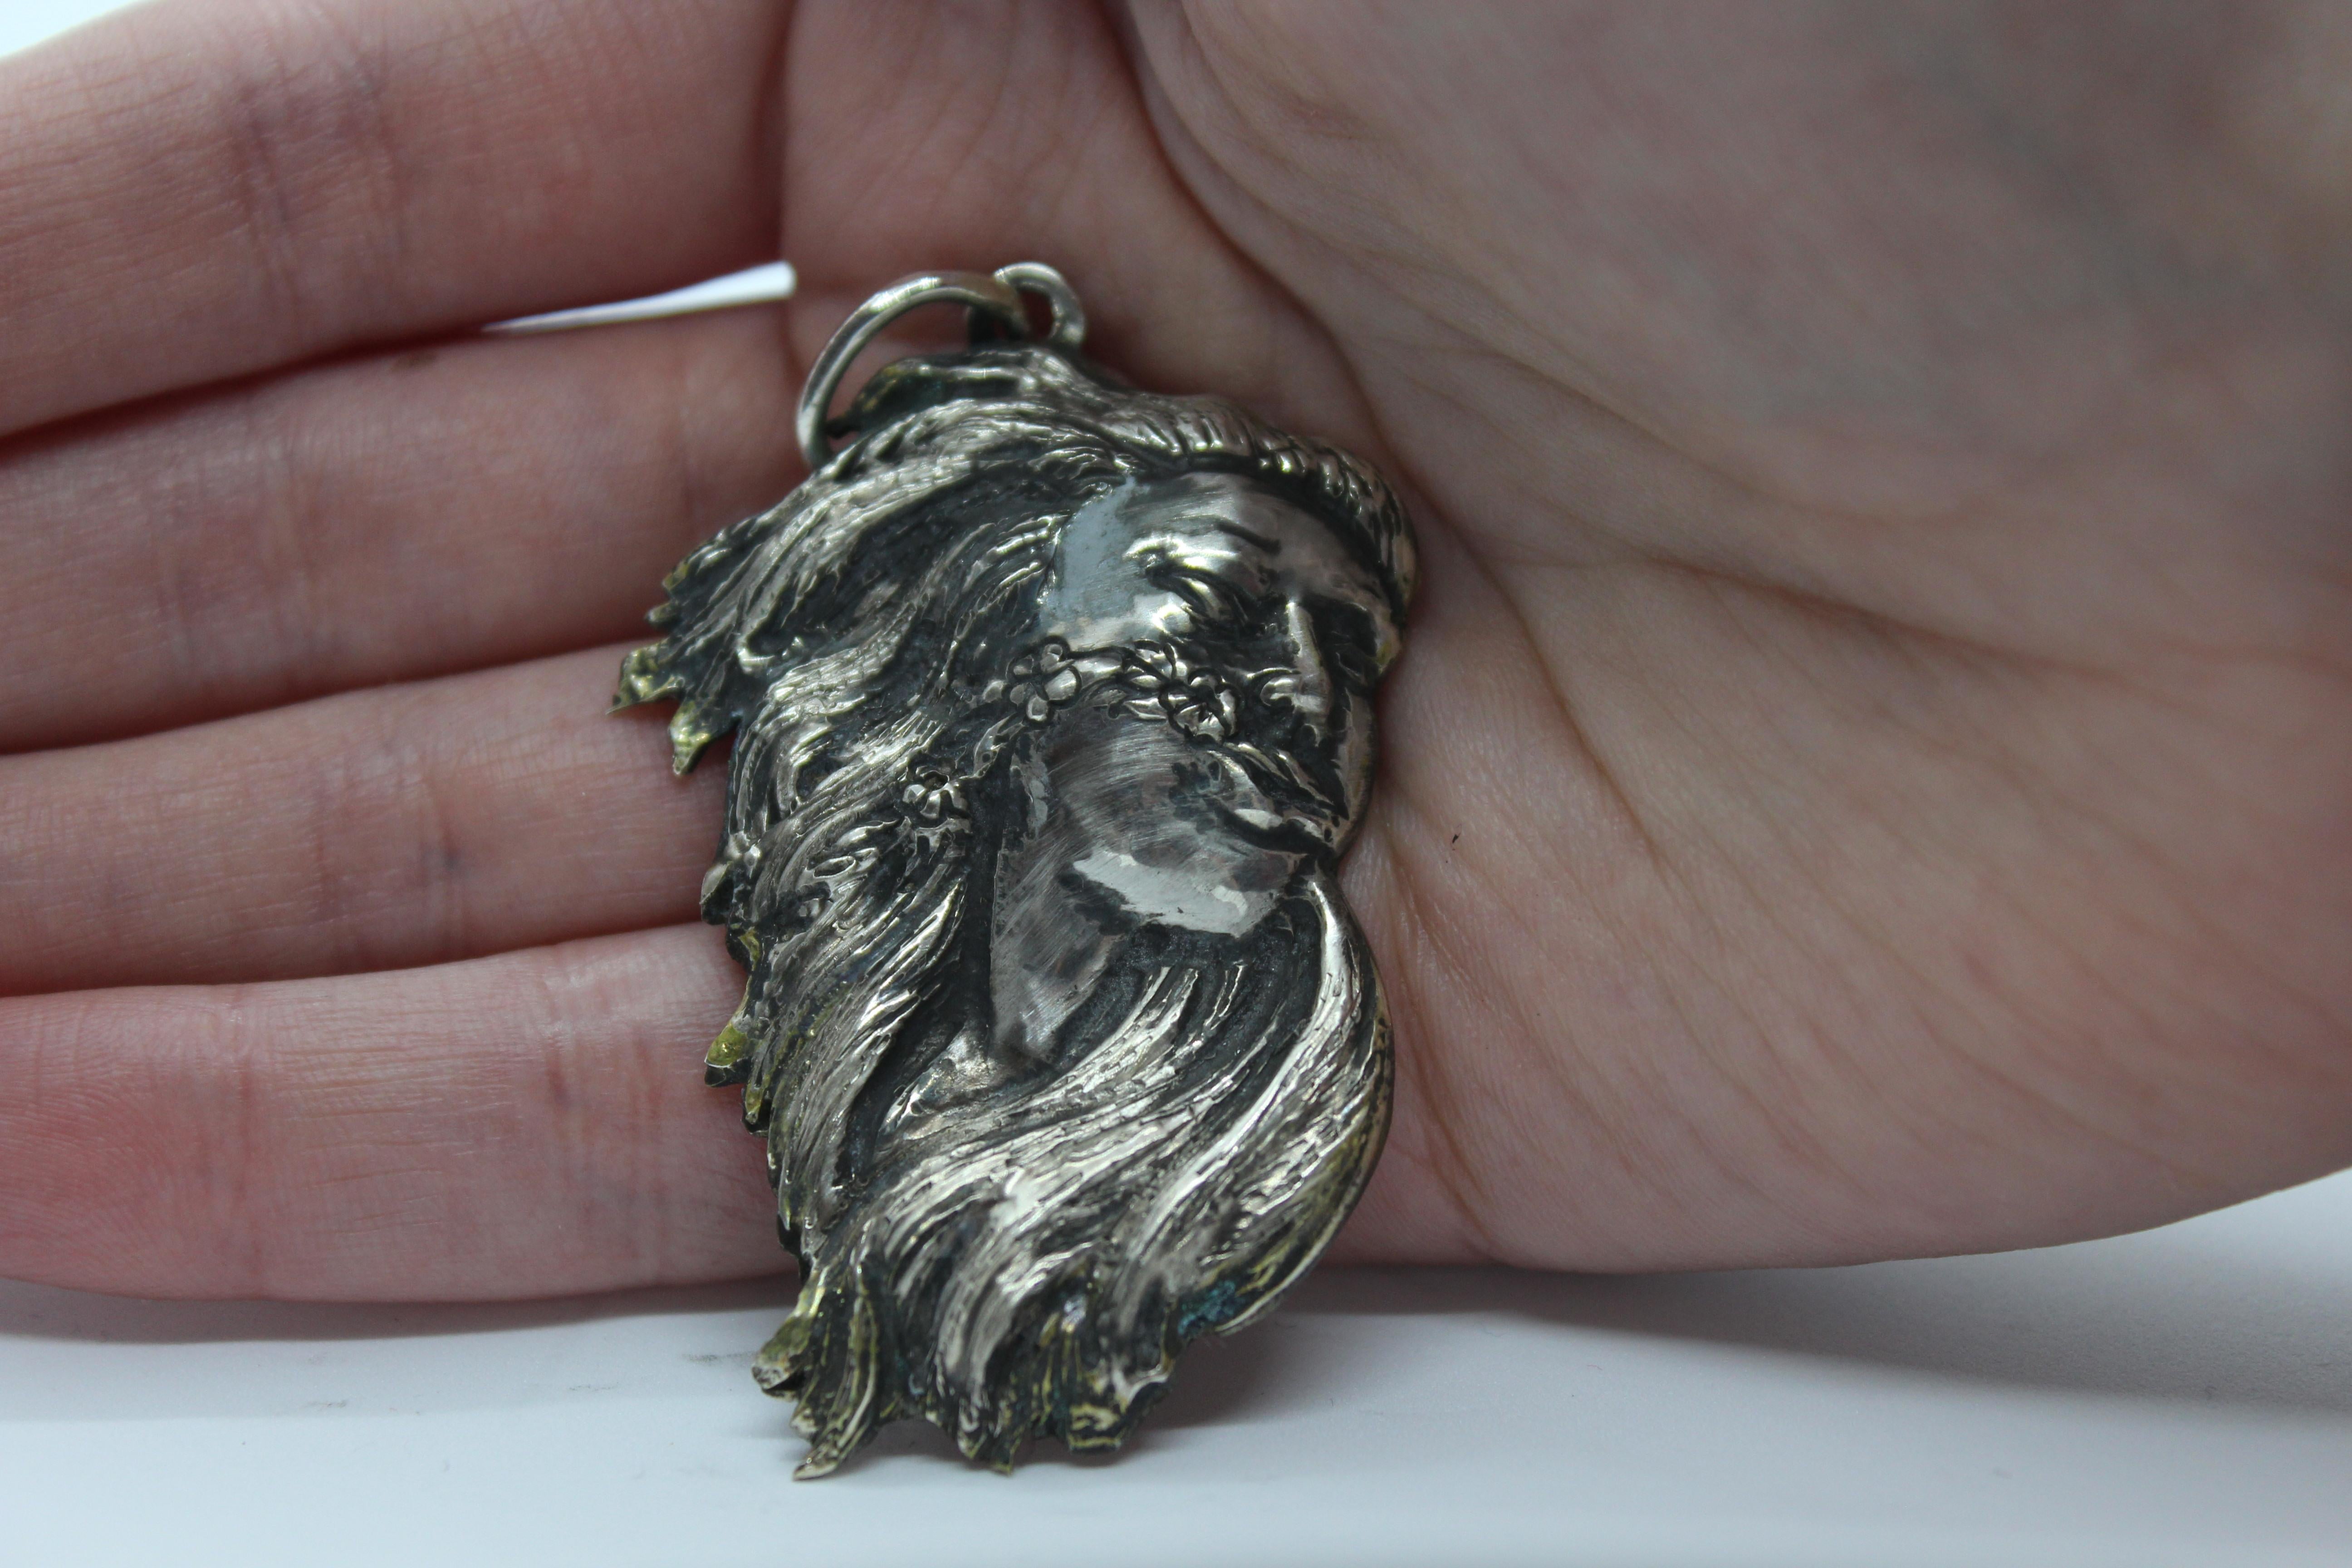 The “Clori” pendant is part of our jewelry line “Homage to the ancestors”, inspired by famous oeuvres of great artists. Specifically, this pendant represents Clori: one of the main characters of the well- known Primavera of Botticelli. All our